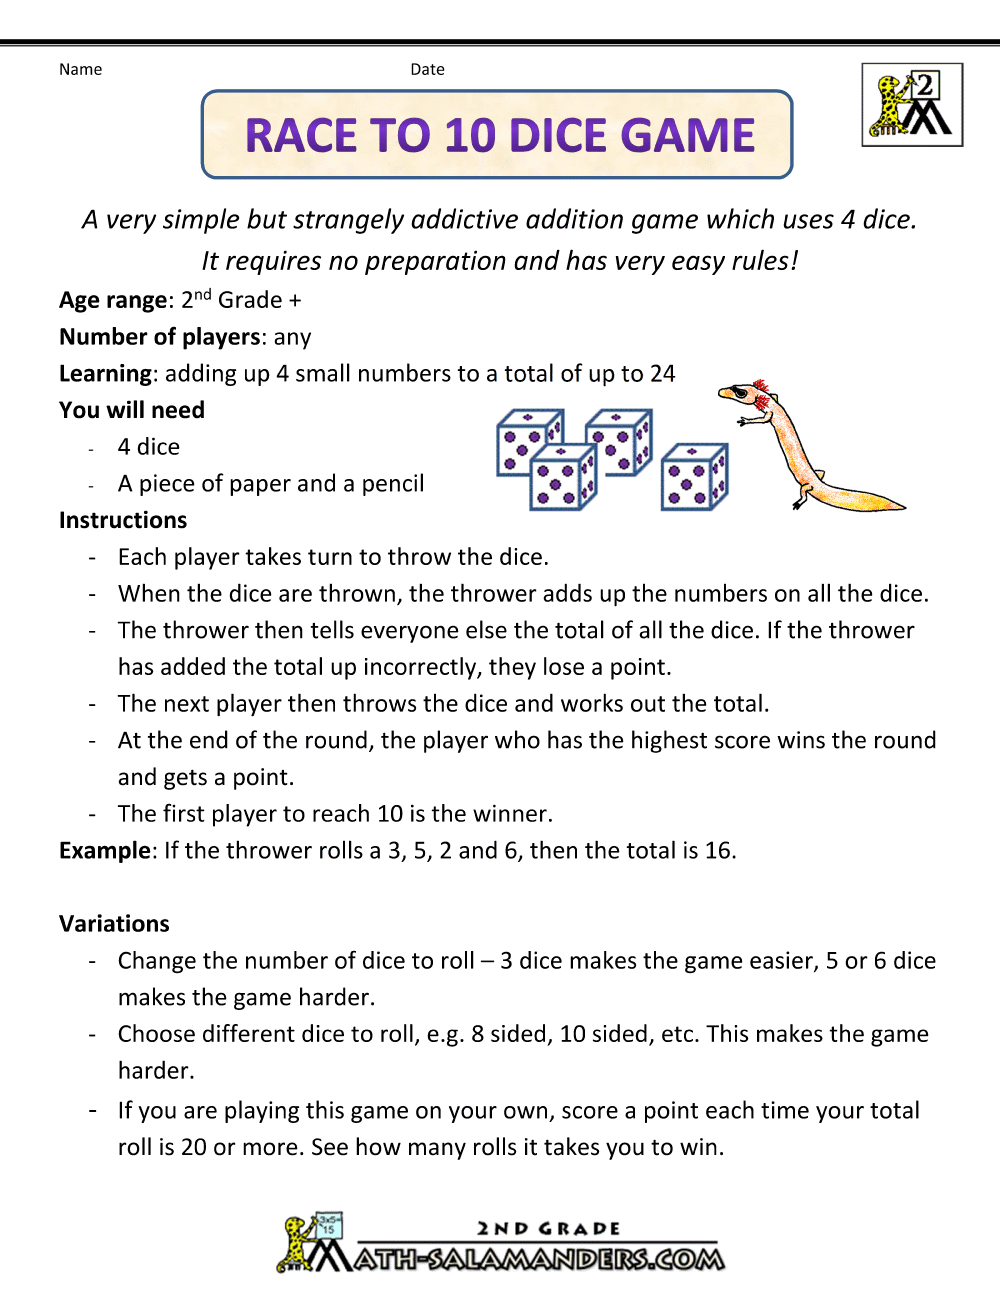 rules-of-5000-dice-game-gettaround